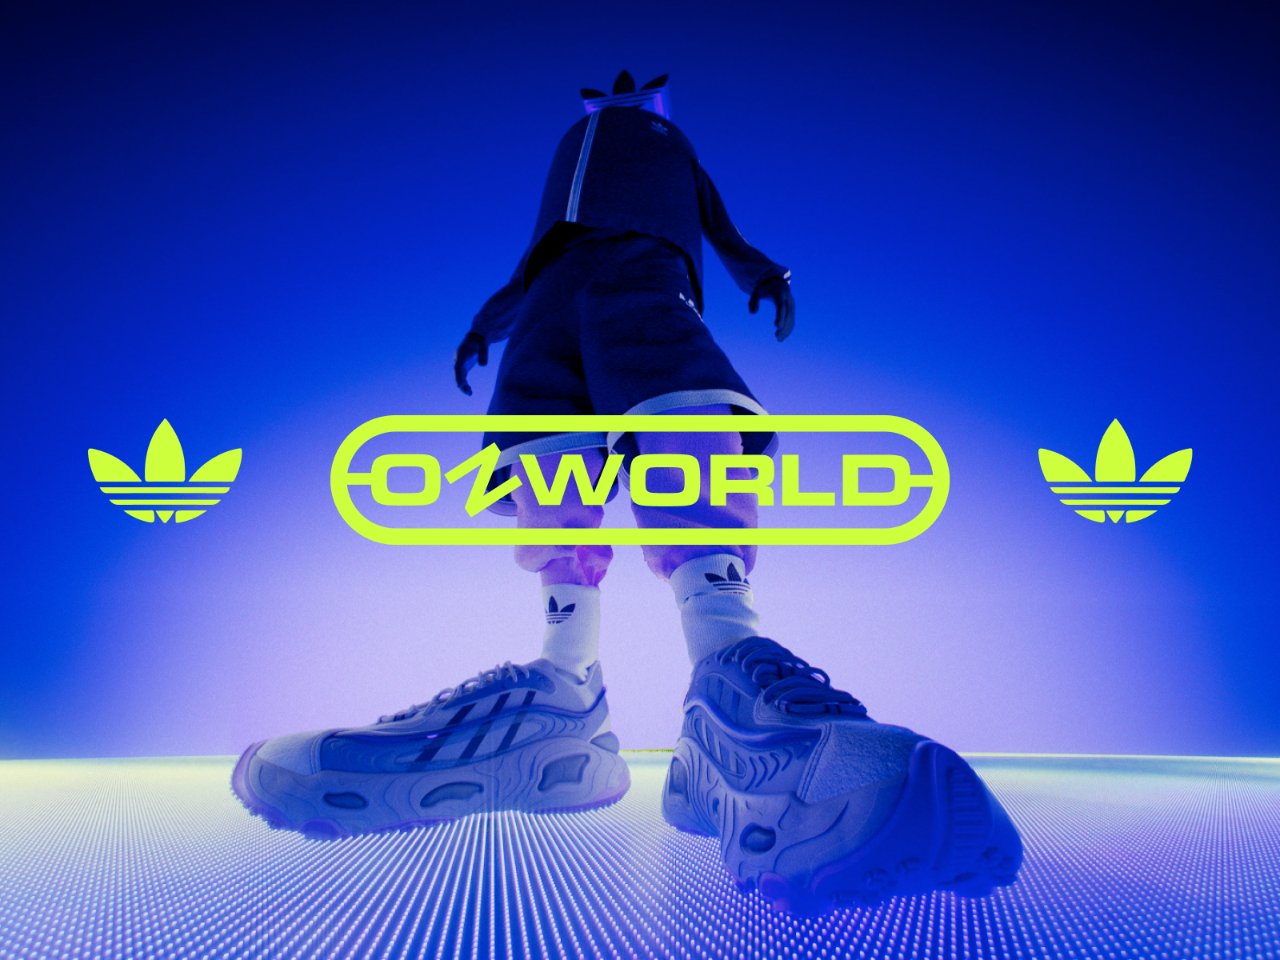 on Twitter: "adidas Ozworld by @jam3 (Canada) wins #SOTD &amp; adidas Ozworld the world's first personality based, AI generated avatar creation platform. ↳ https://t.co/VT2pv85HHf #Unity https://t.co/RfpsDVBDyh" / Twitter